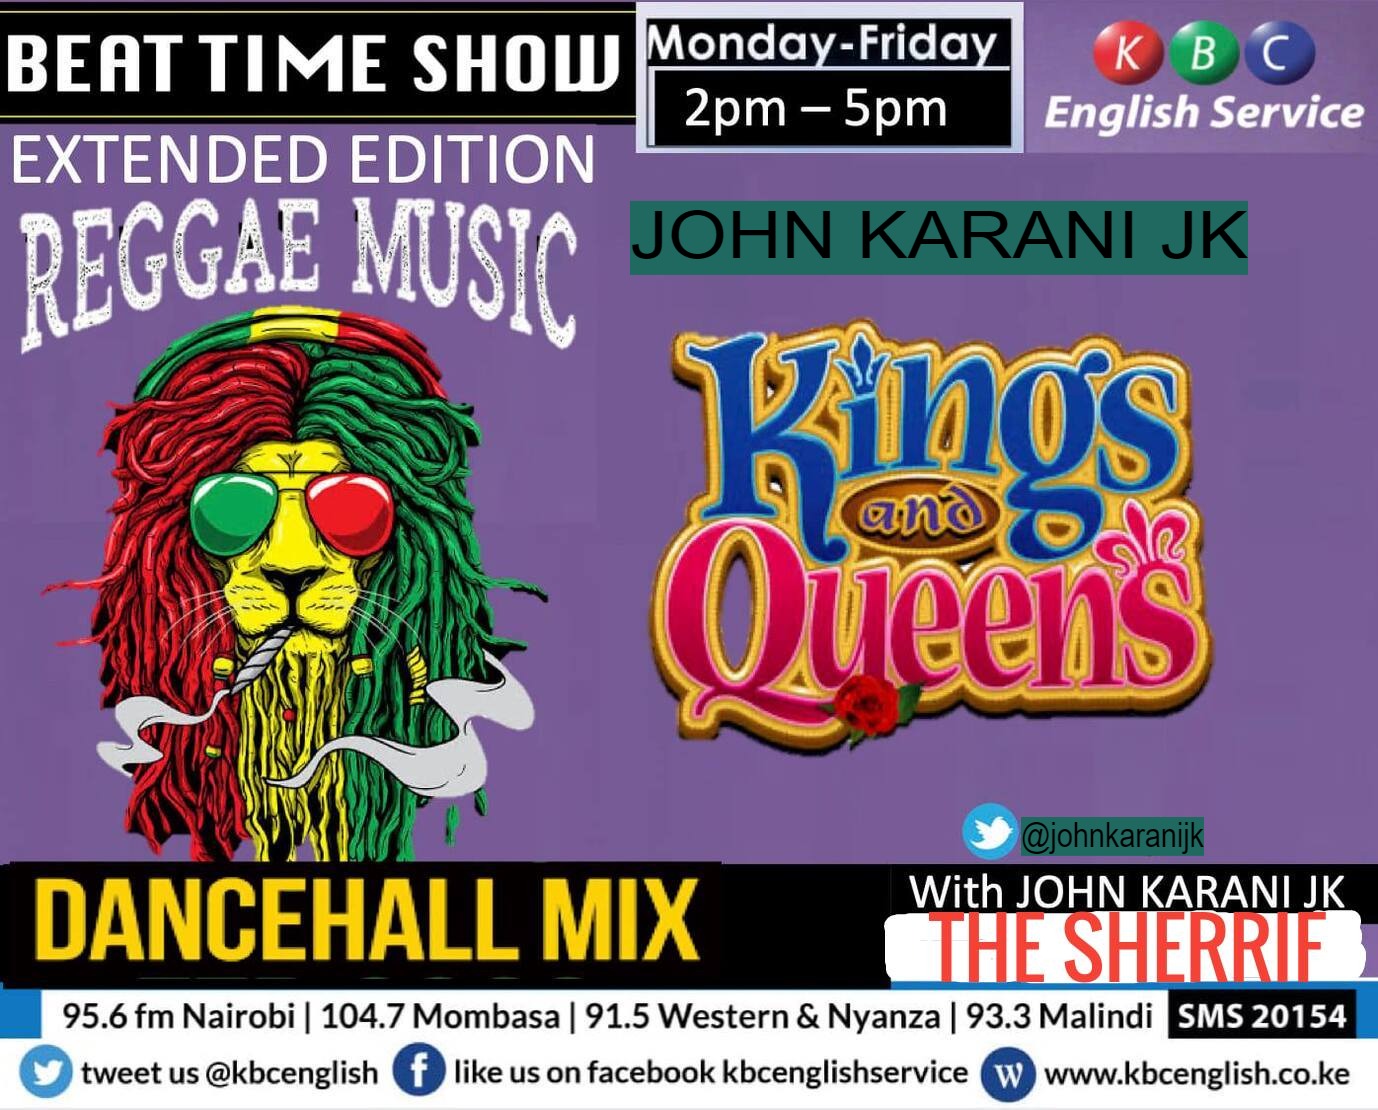 KBC English Service on X: Put on your Gideon Boots and Khaki Suits for a  Classical Reggae Journey. Dancehall Kings and Queens 4pm - 5pm with your  New Sherriff in town John